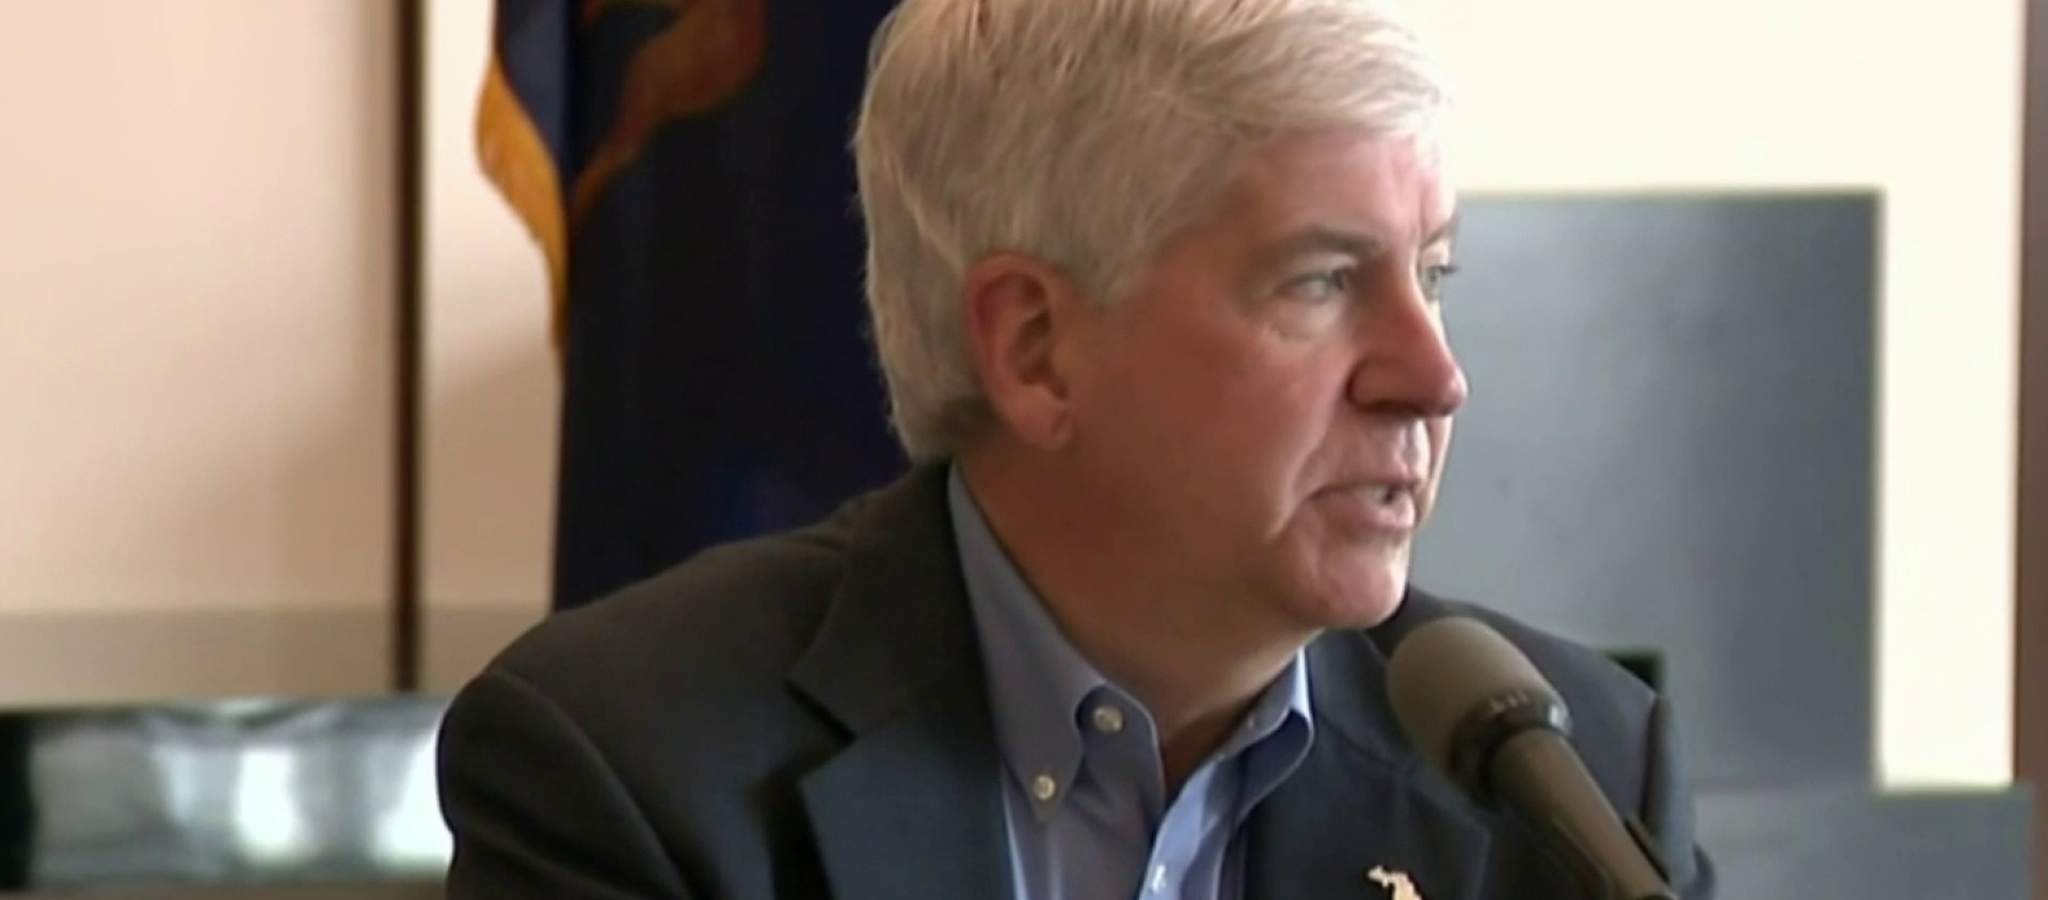 Judge denies request to dismiss charges against Rick Snyder in Flint water crisis